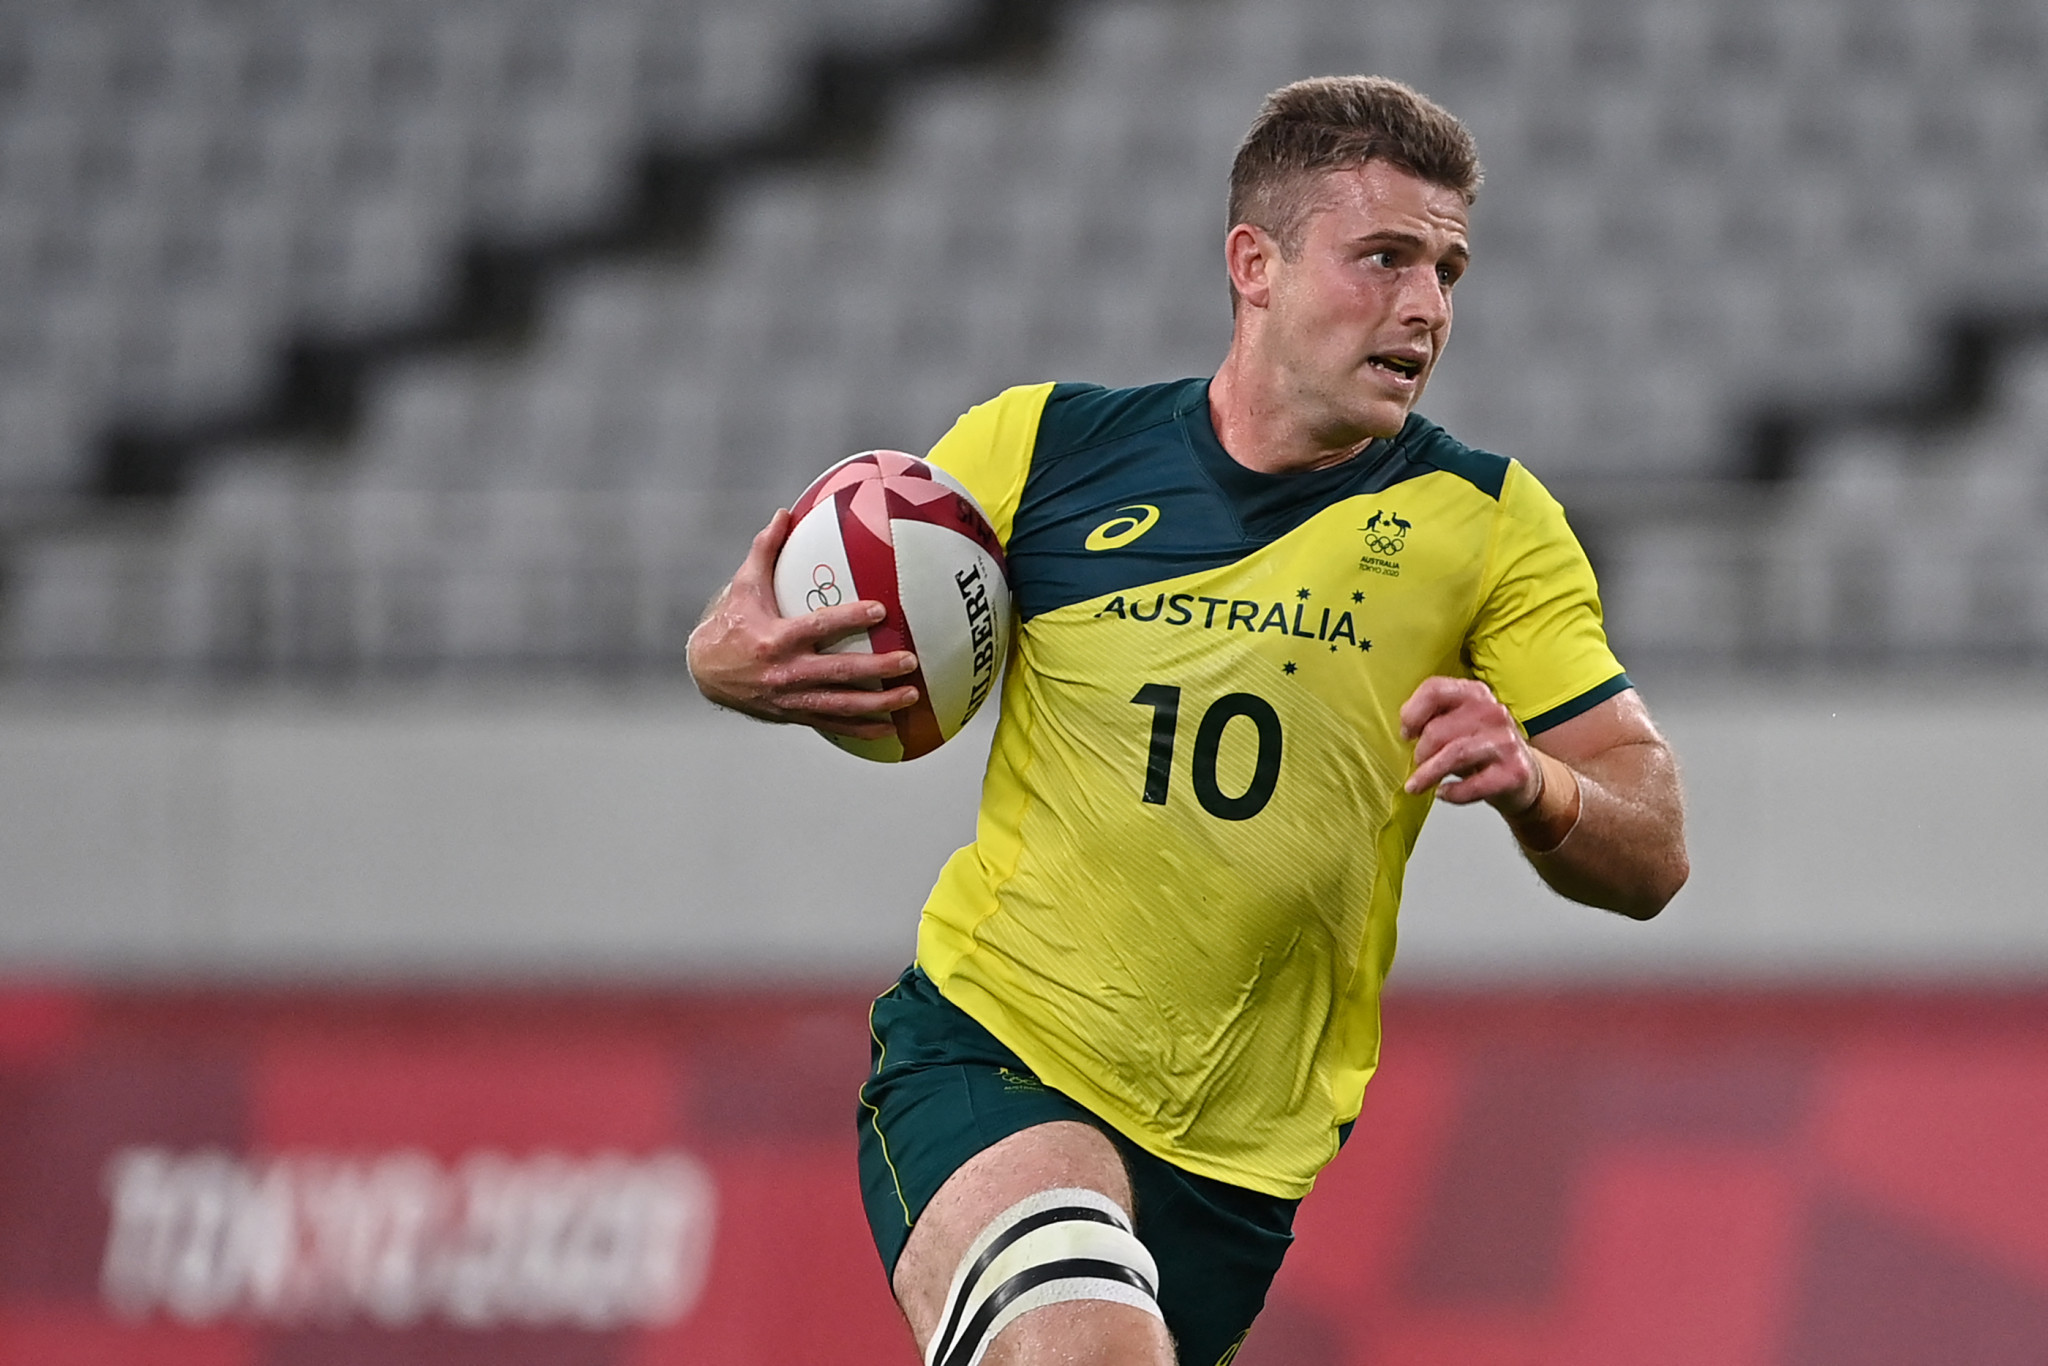 Australia triumphs in London to force title-deciding leg in World Rugby Sevens Series